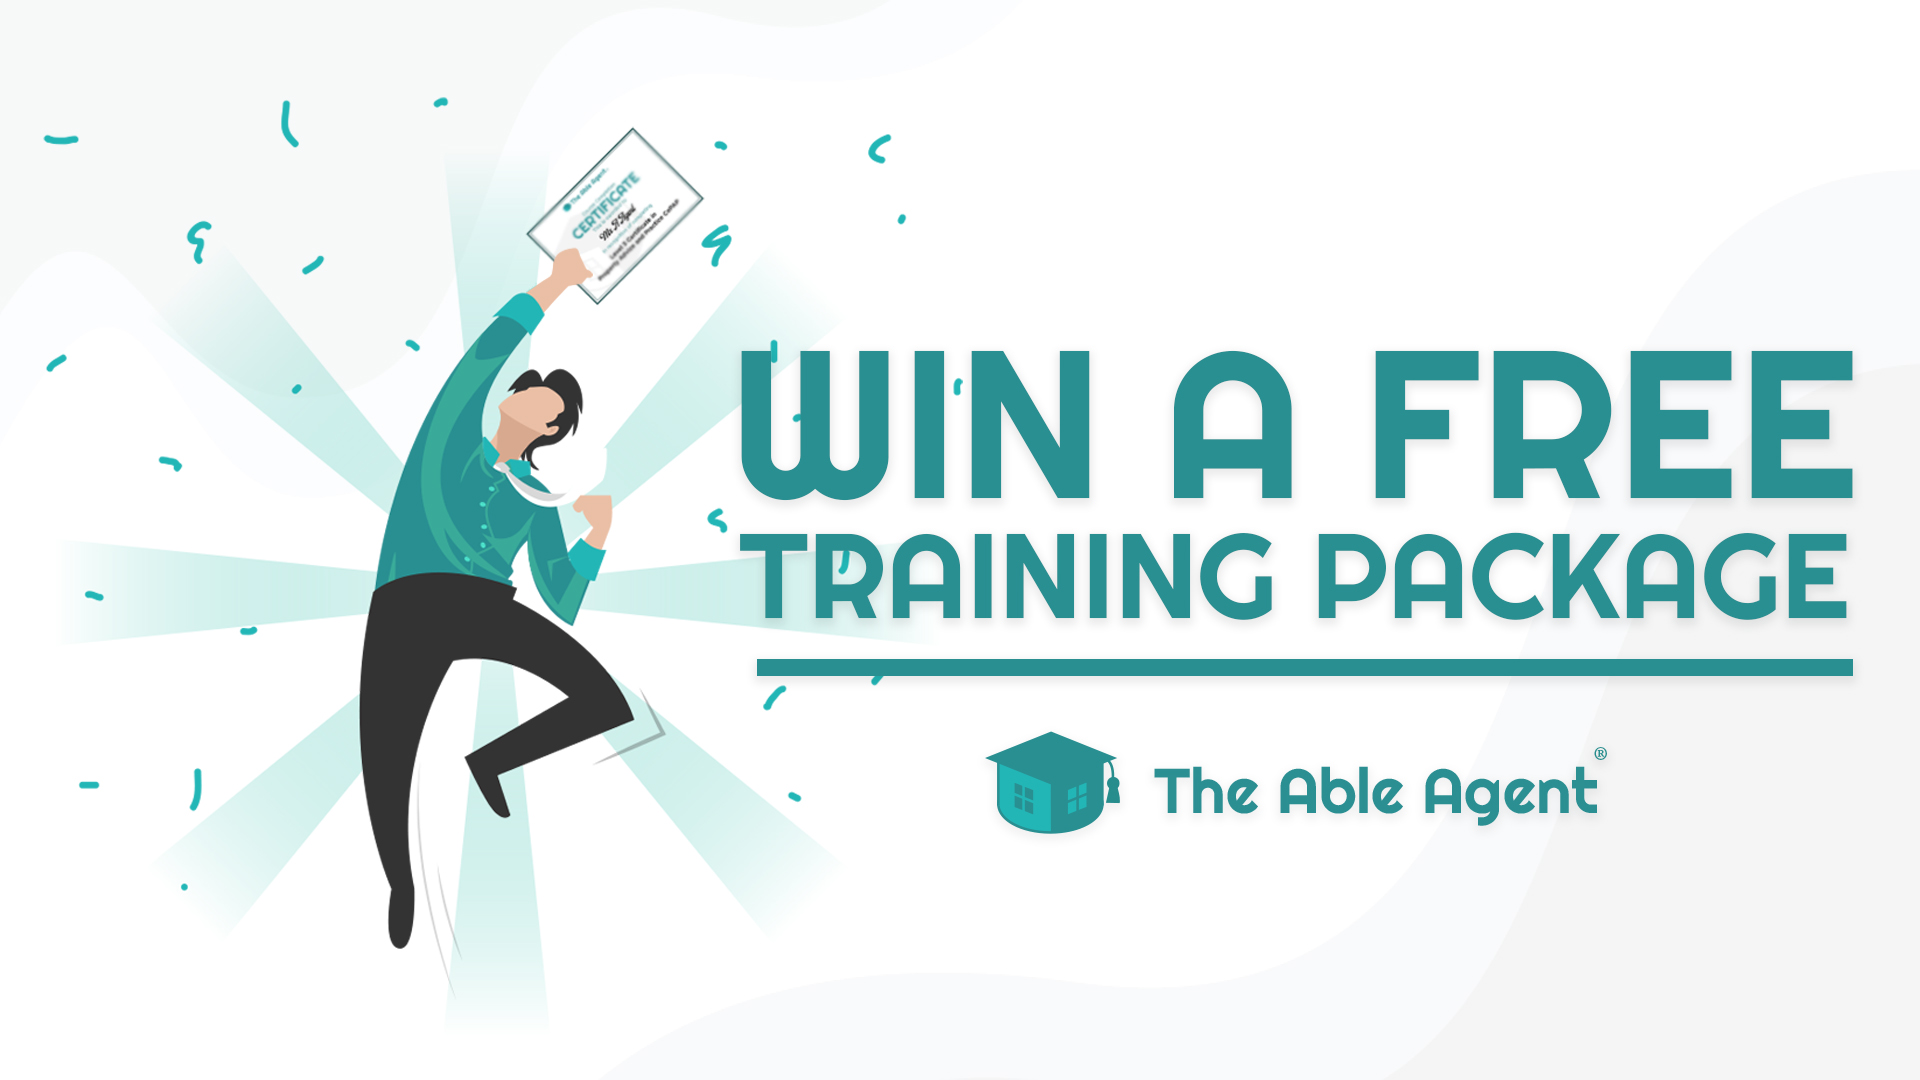 Win a free training package